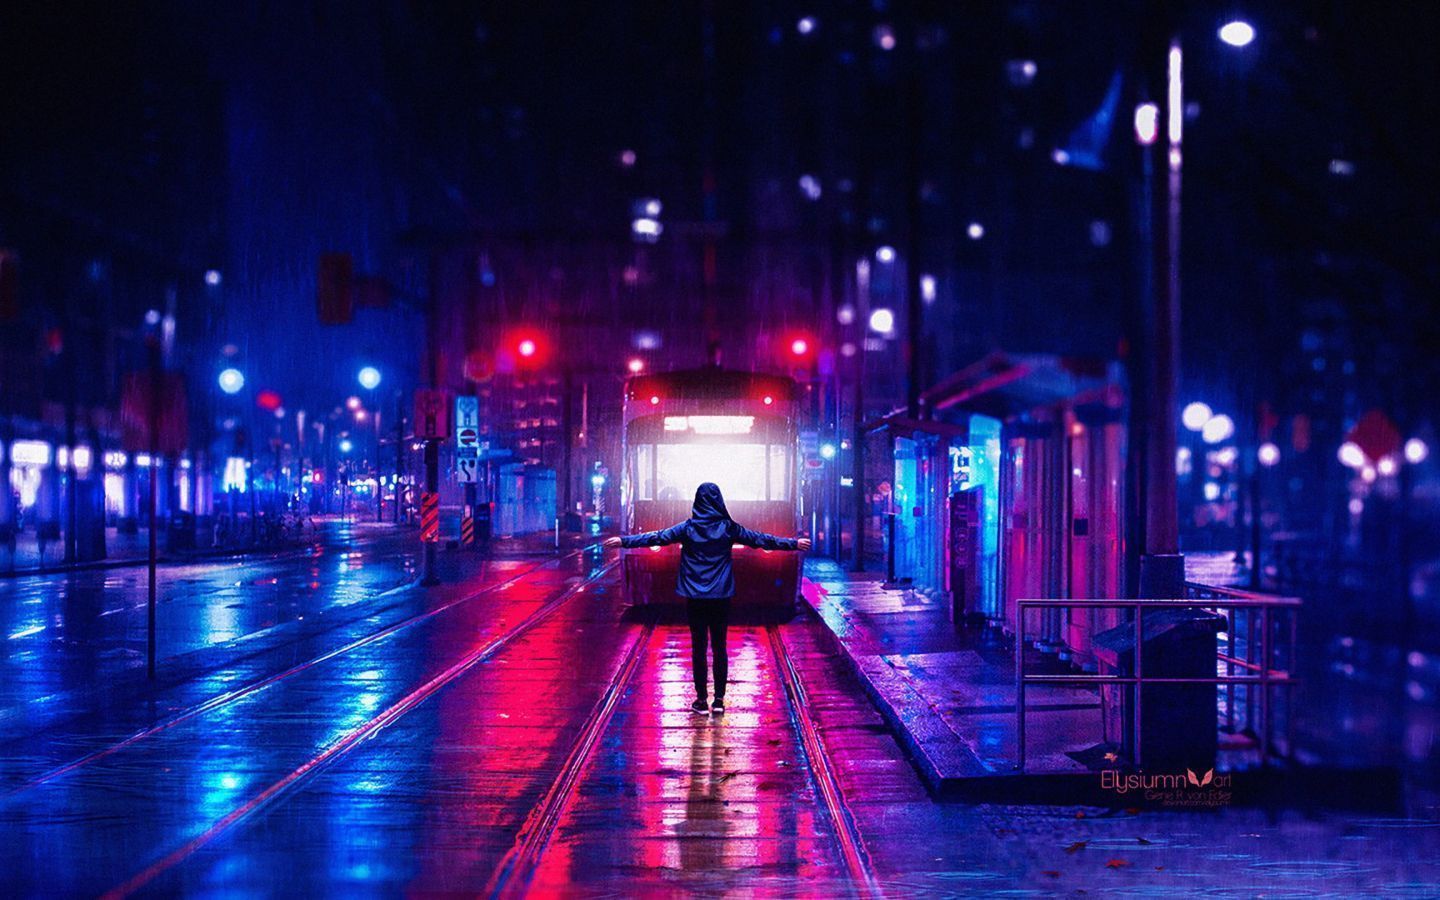 A person standing on a train track in the rain - 1440x900